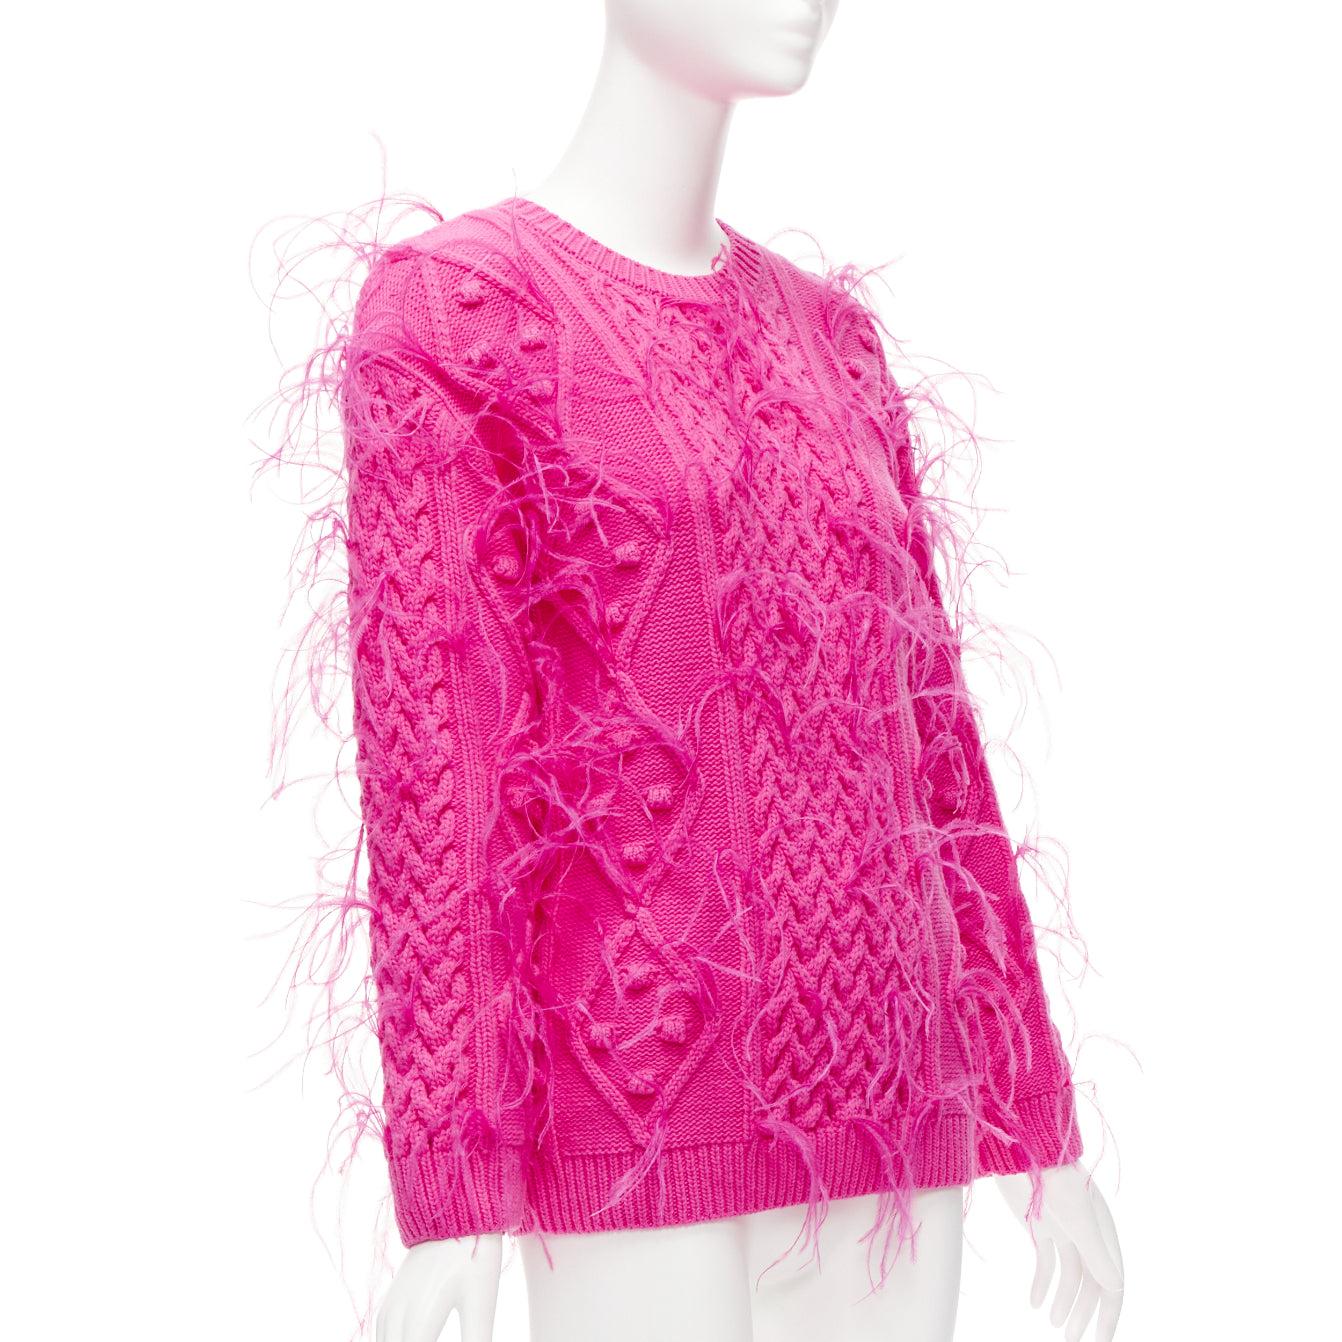 rare VALENTINO PP Pink wool feather embellished mixed cable knit sweater XS
Reference: AAWC/A00655
Brand: Valentino
Designer: Pier Paolo Piccioli
Material: Virgin Wool, Feather
Color: Pink
Pattern: Solid
Extra Details: Crew neck. Mixed cable knit